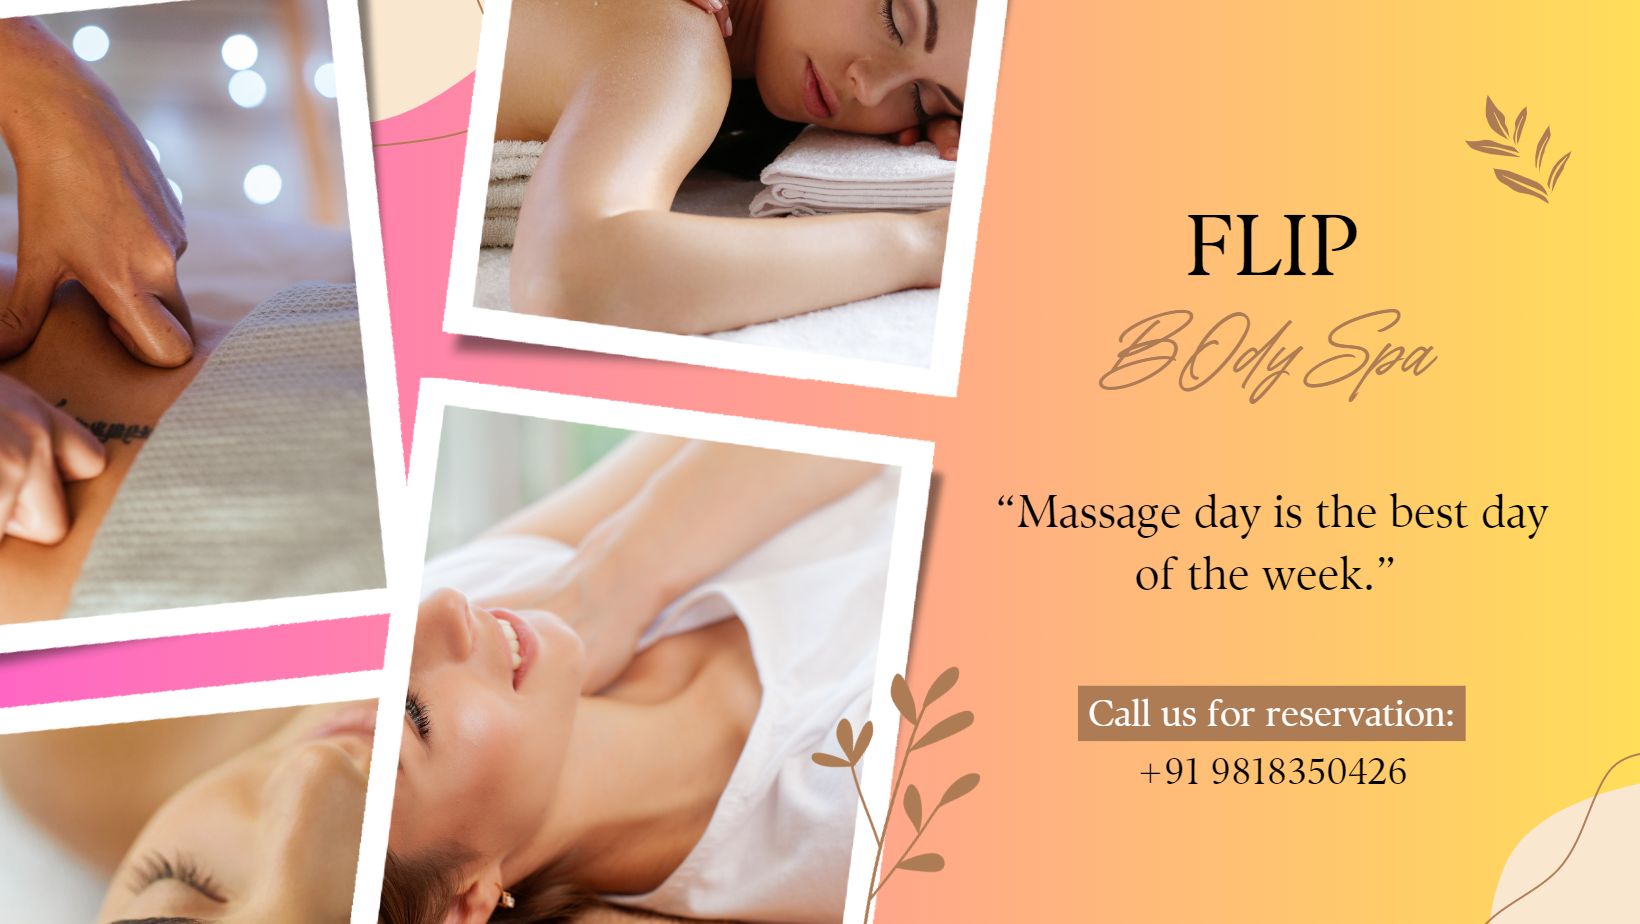 Flip Body Spa – Discover Blissful Relaxation and Renewal in the Heart of Gurgaon